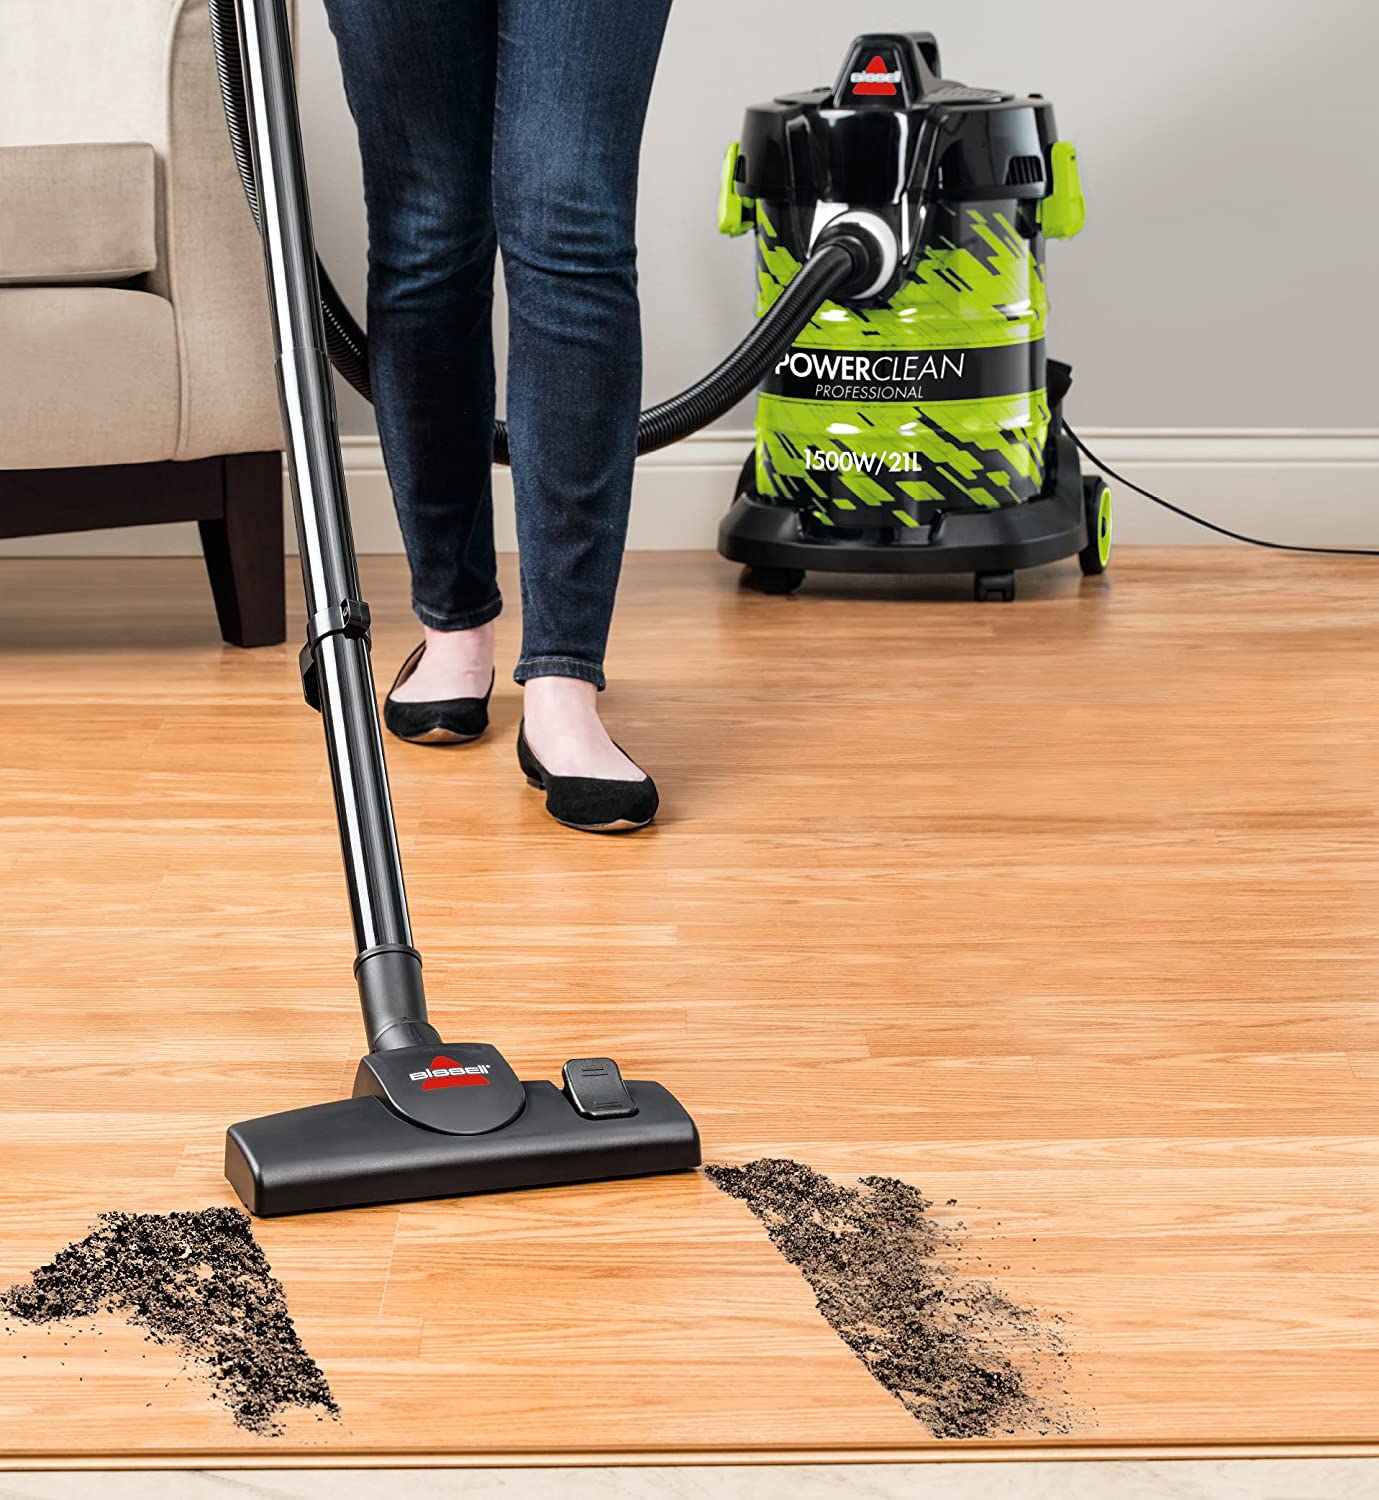 Bissell Premium Power Clean Professional Wet & Dry Canister Vacuum Cleaner